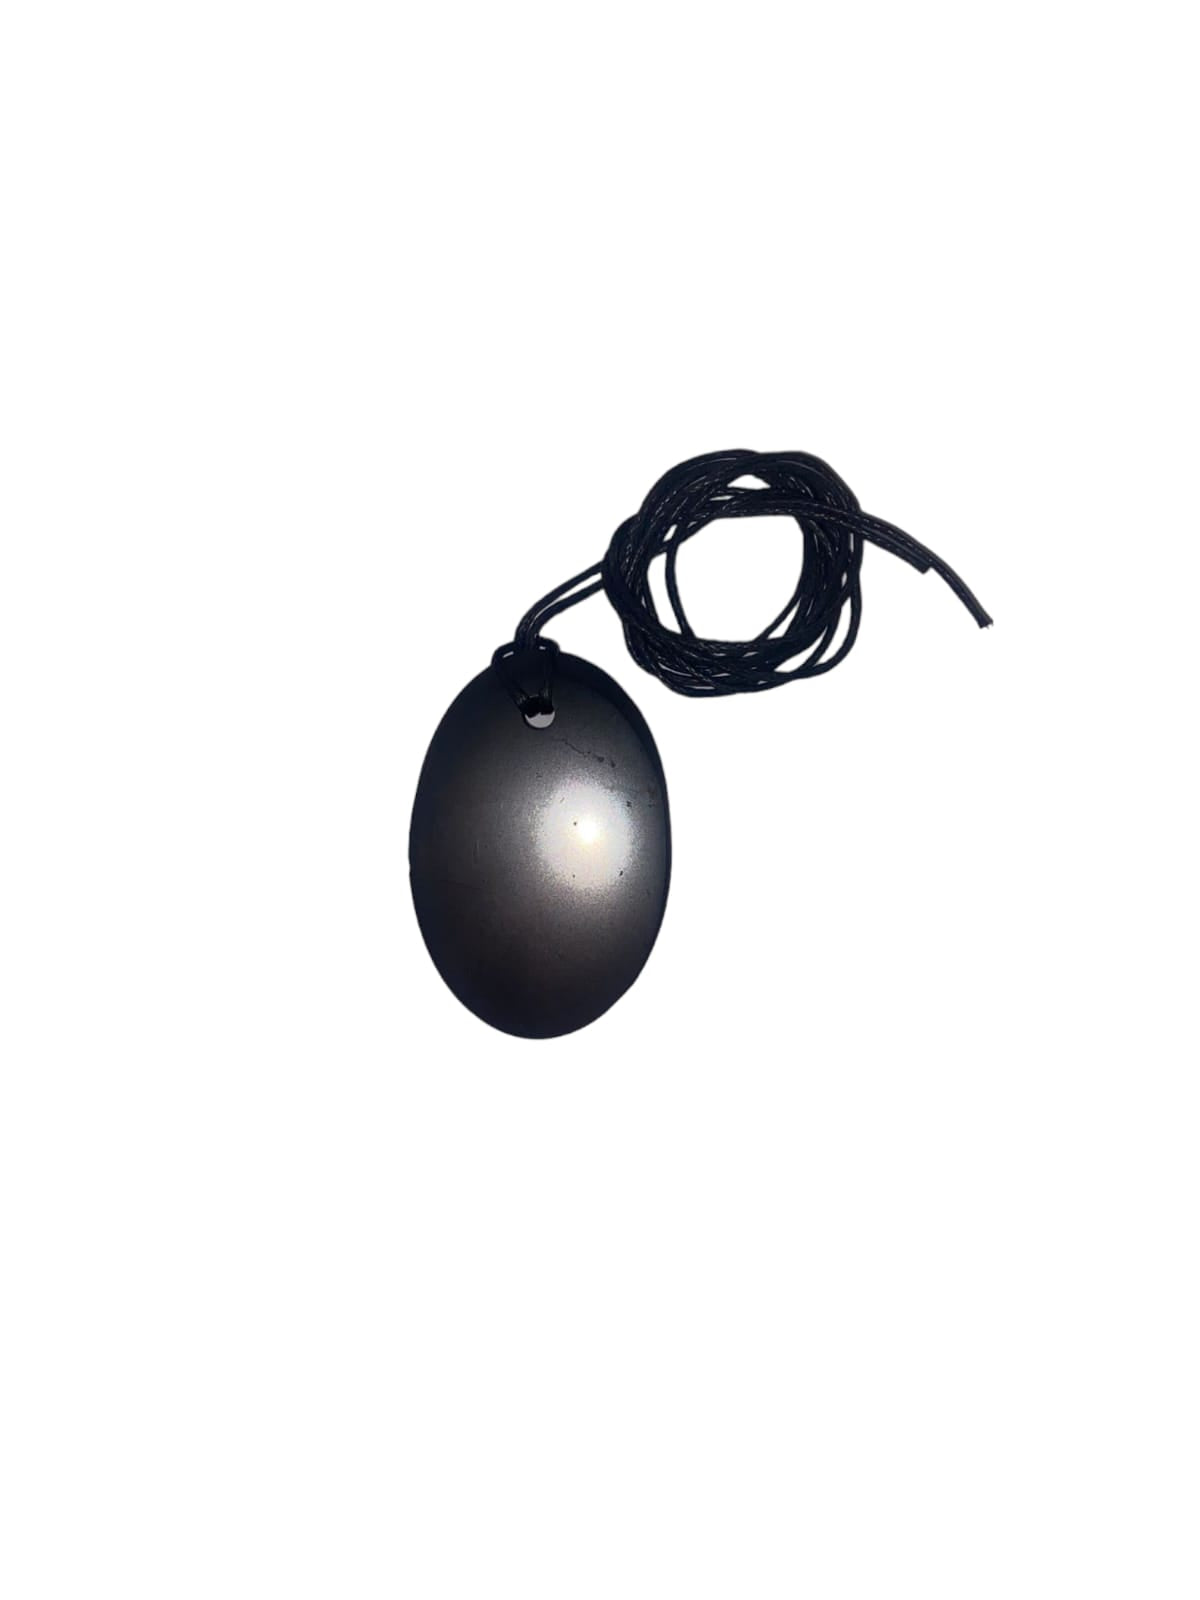 GeoFossils Oval Shungite Black Pendant with Cotton Cord